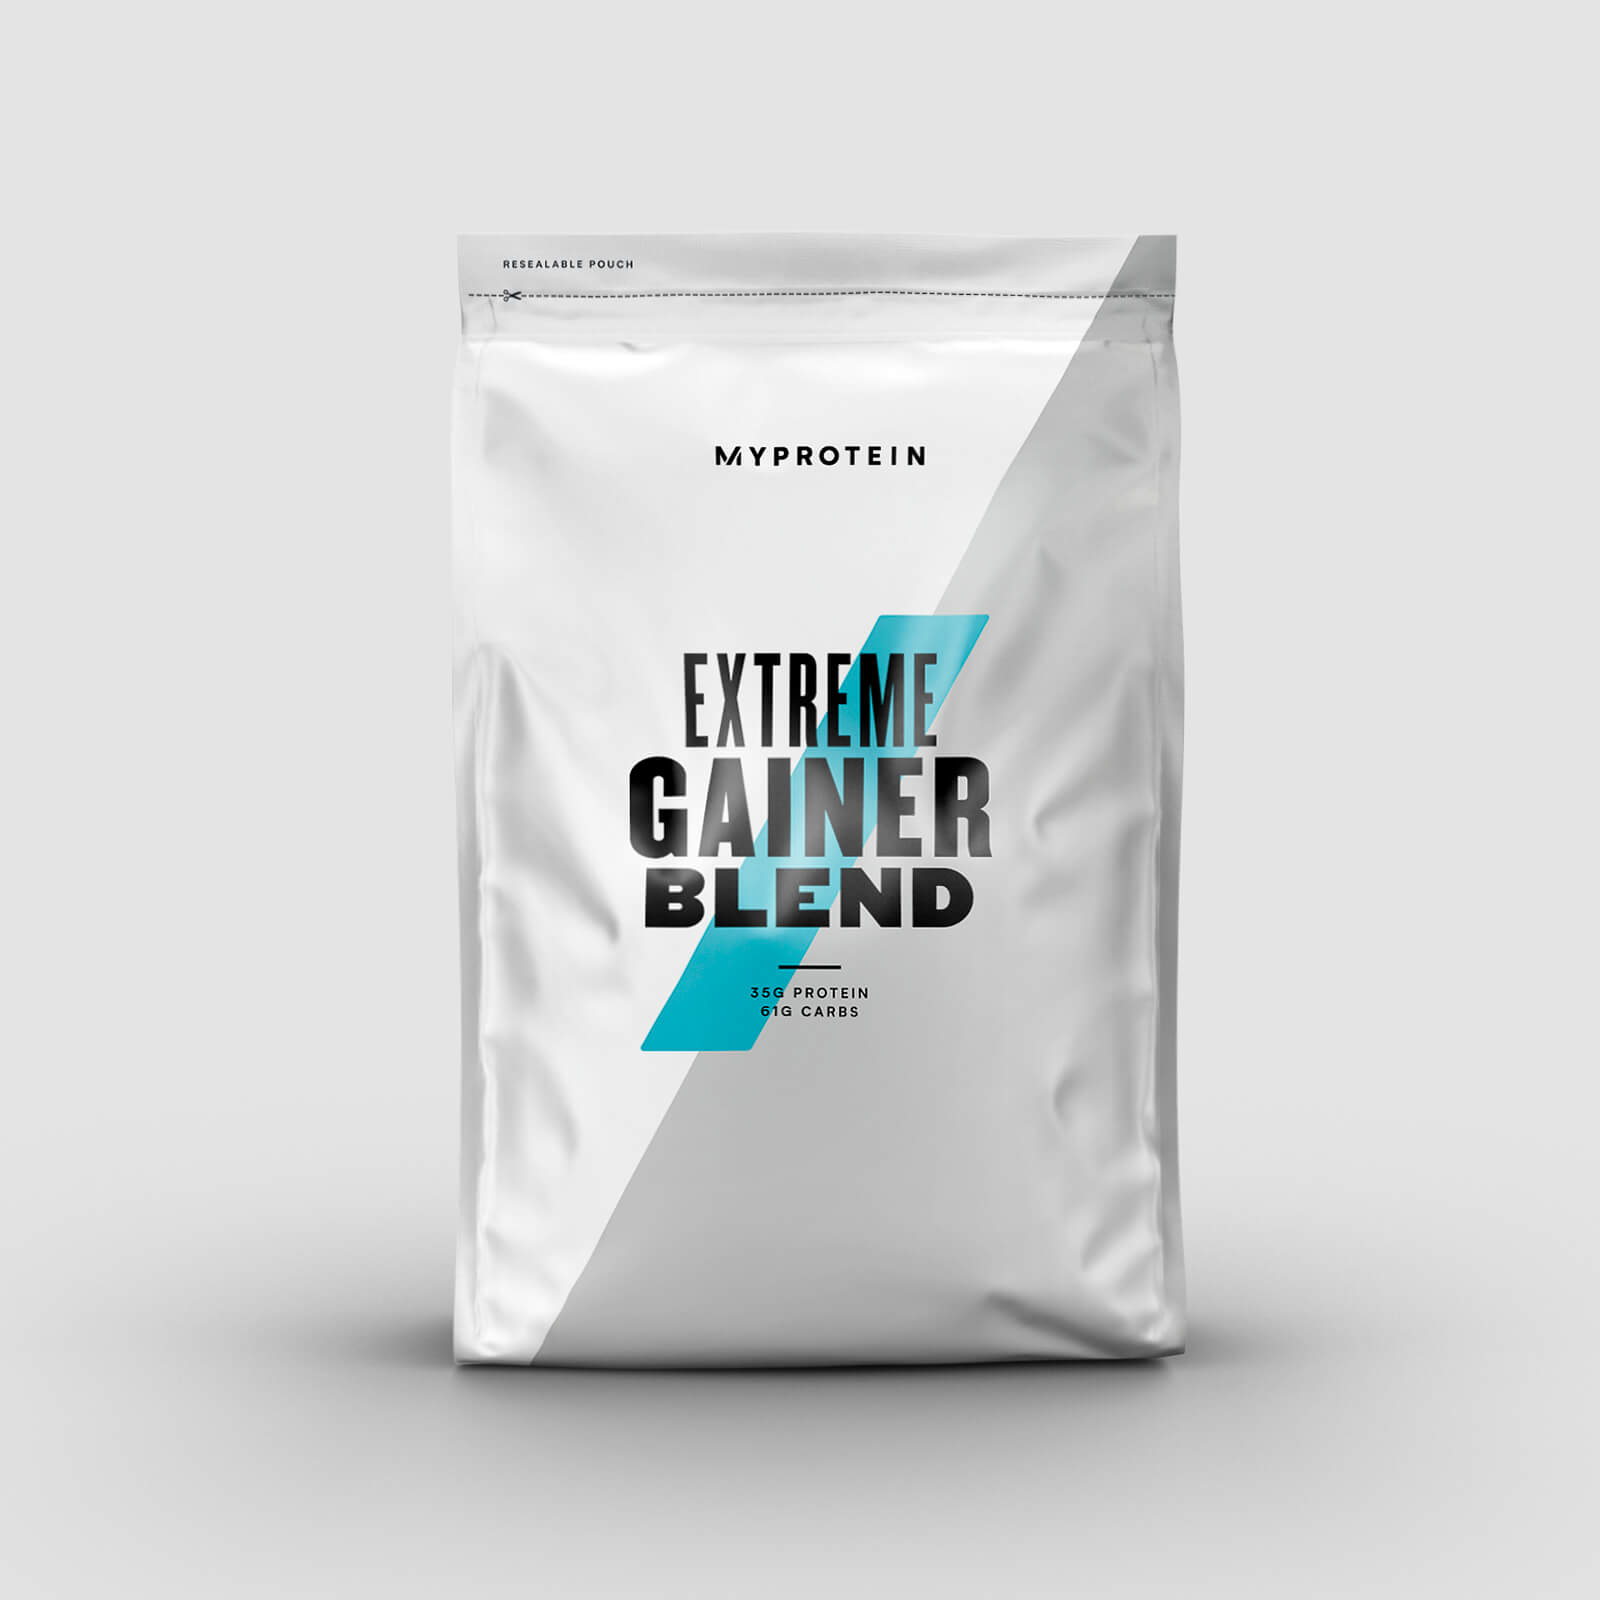 Myprotein Extreme Gainer Blend - 5kg - Chocolate Smooth - New and Improved